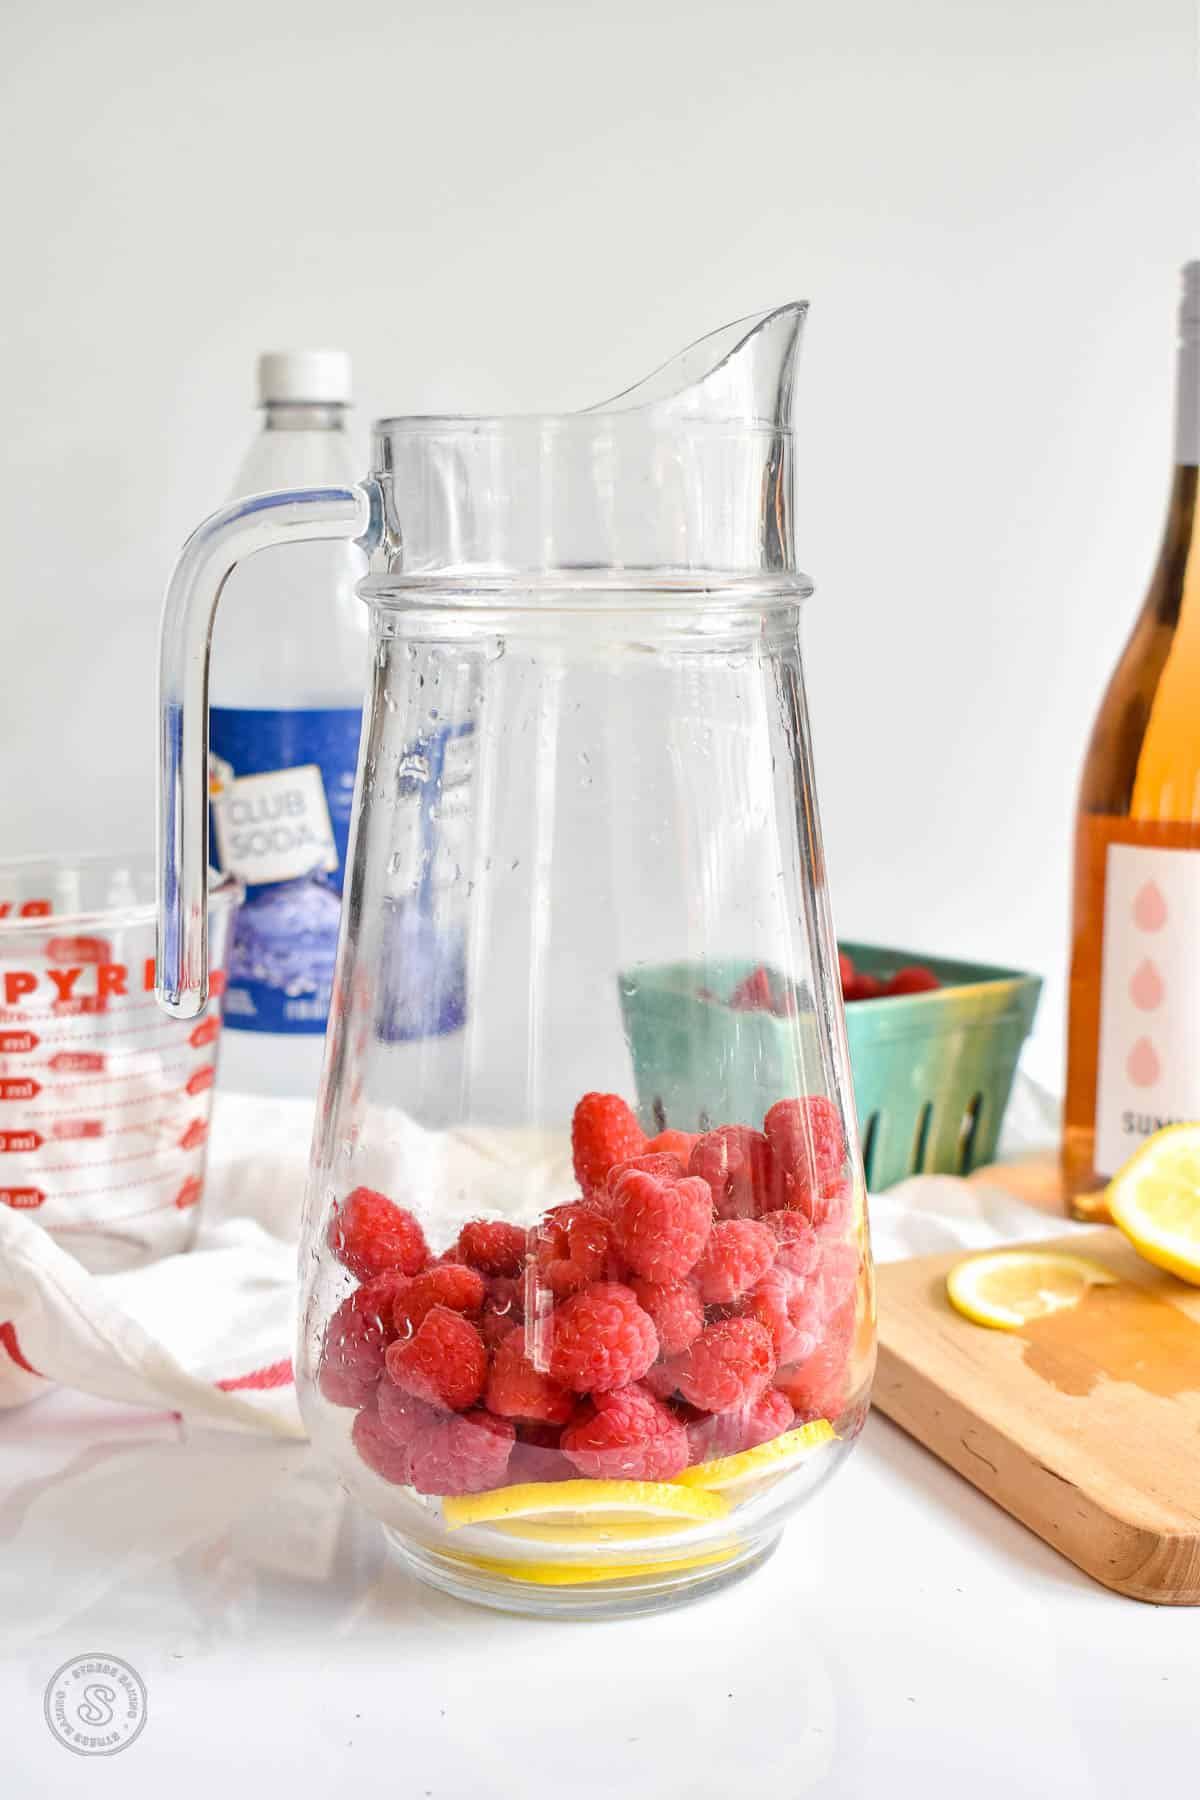 Thinly sliced lemons and raspberries in a clear pitcher